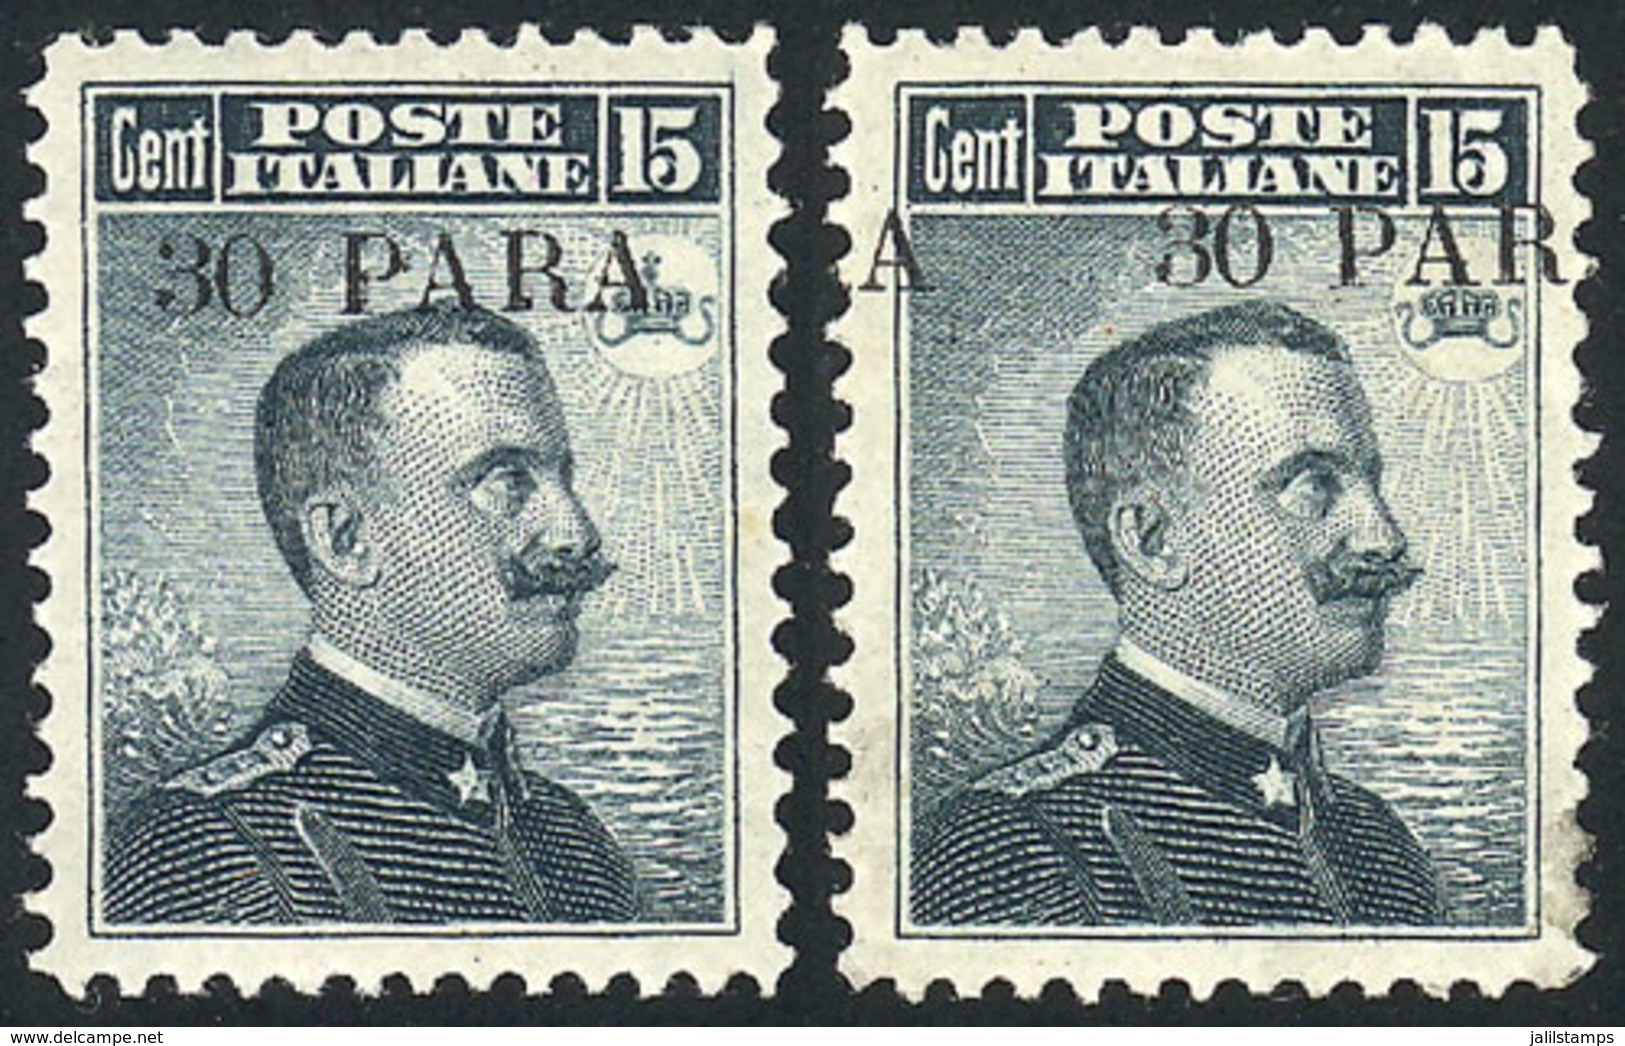 ITALY - LEVANT: Scott 15, 2 Examples, One With Very Shifted Overprint, VF Quality, Rare! - Non Classés